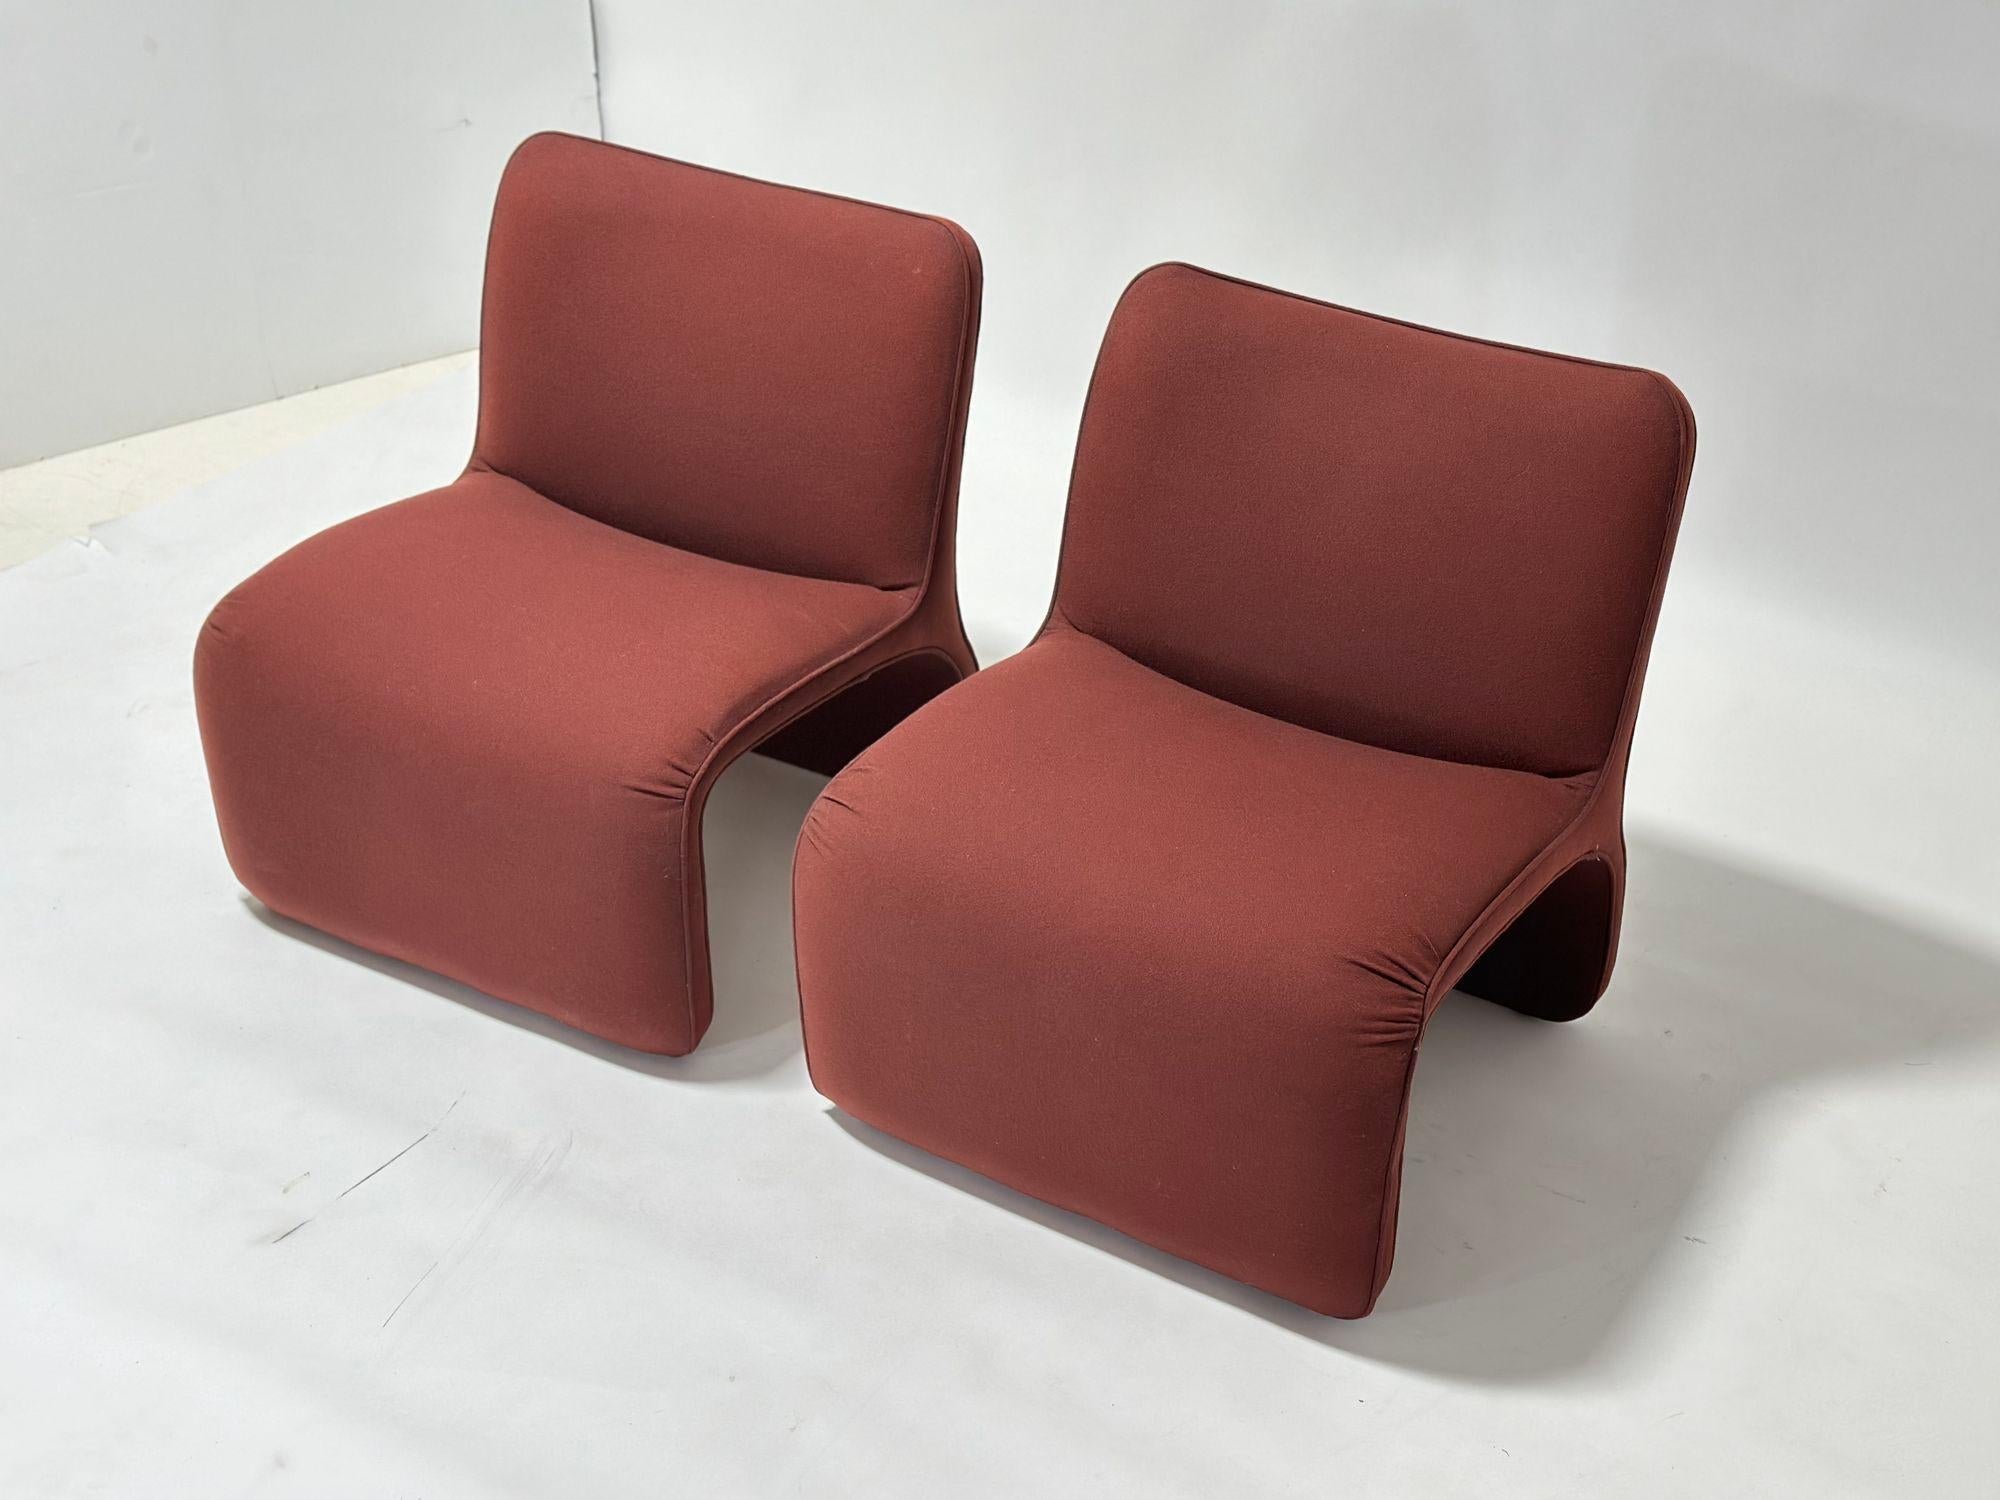 American Sculptural Slipper Lounge Chairs for Preview, 1990